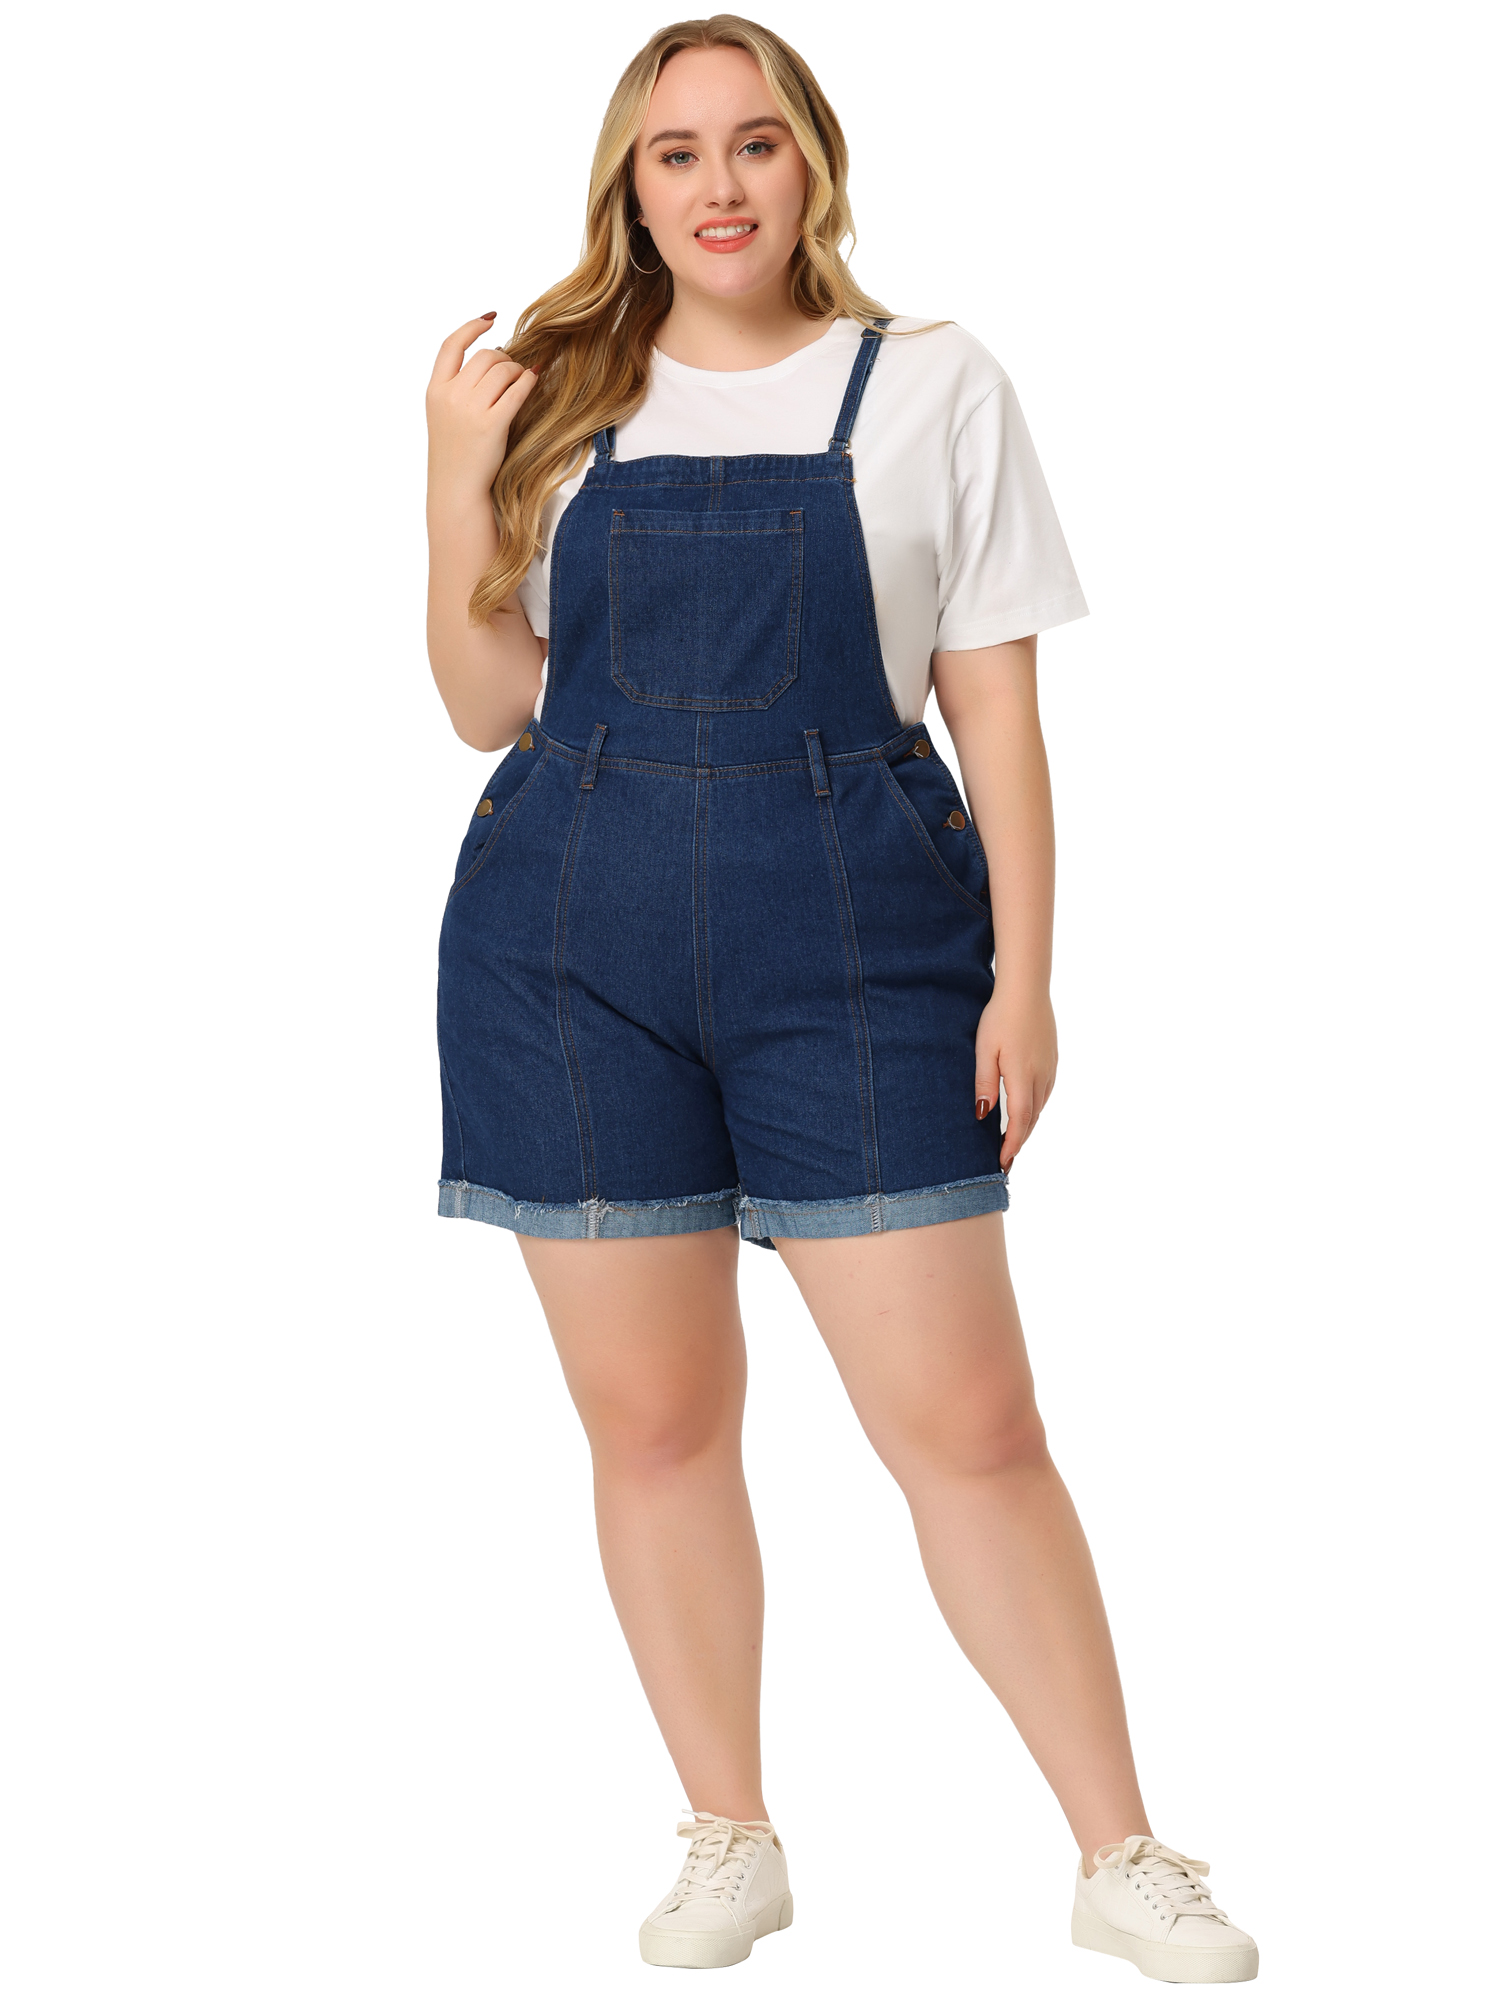 Unique Bargains Plus Size Overalls Denim Pants for Women Roll Ripped Raw Hem Chambray Shorts Pants